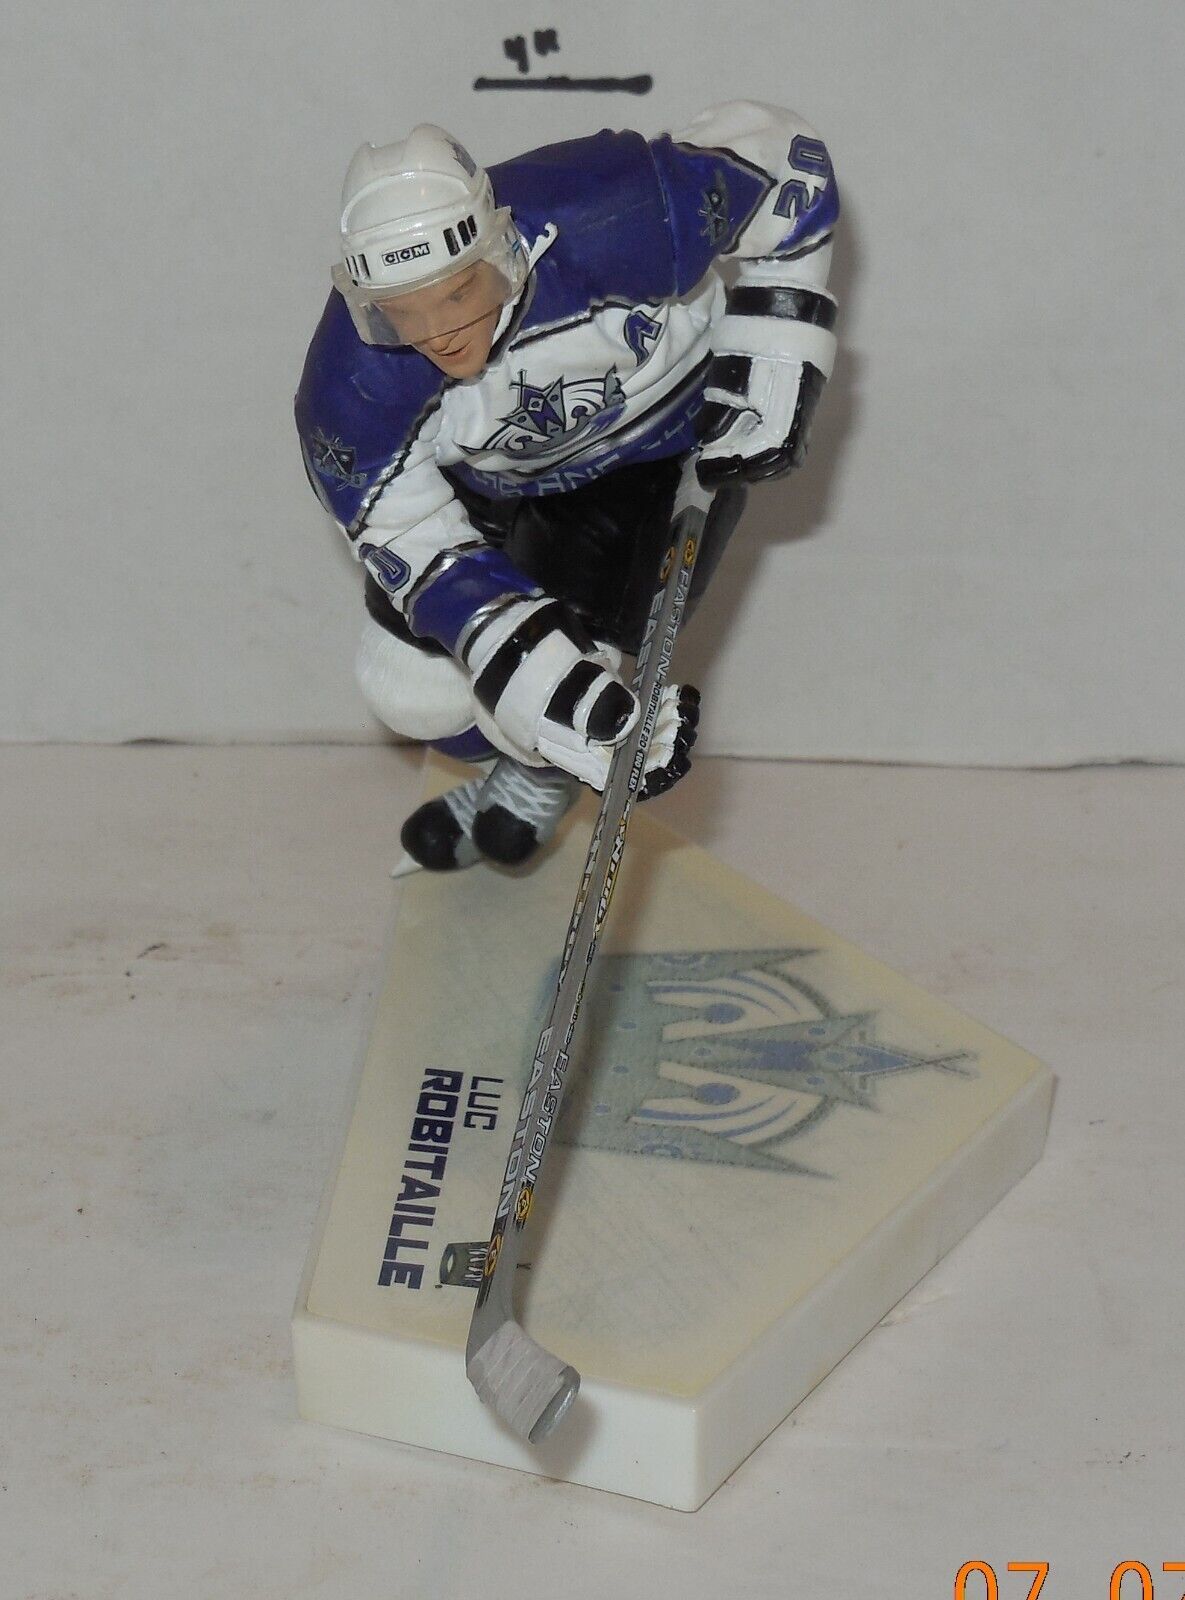 Primary image for McFarlane NHL Series 8 Luc Robitaille Action Figure VHTF Los Angeles Kings